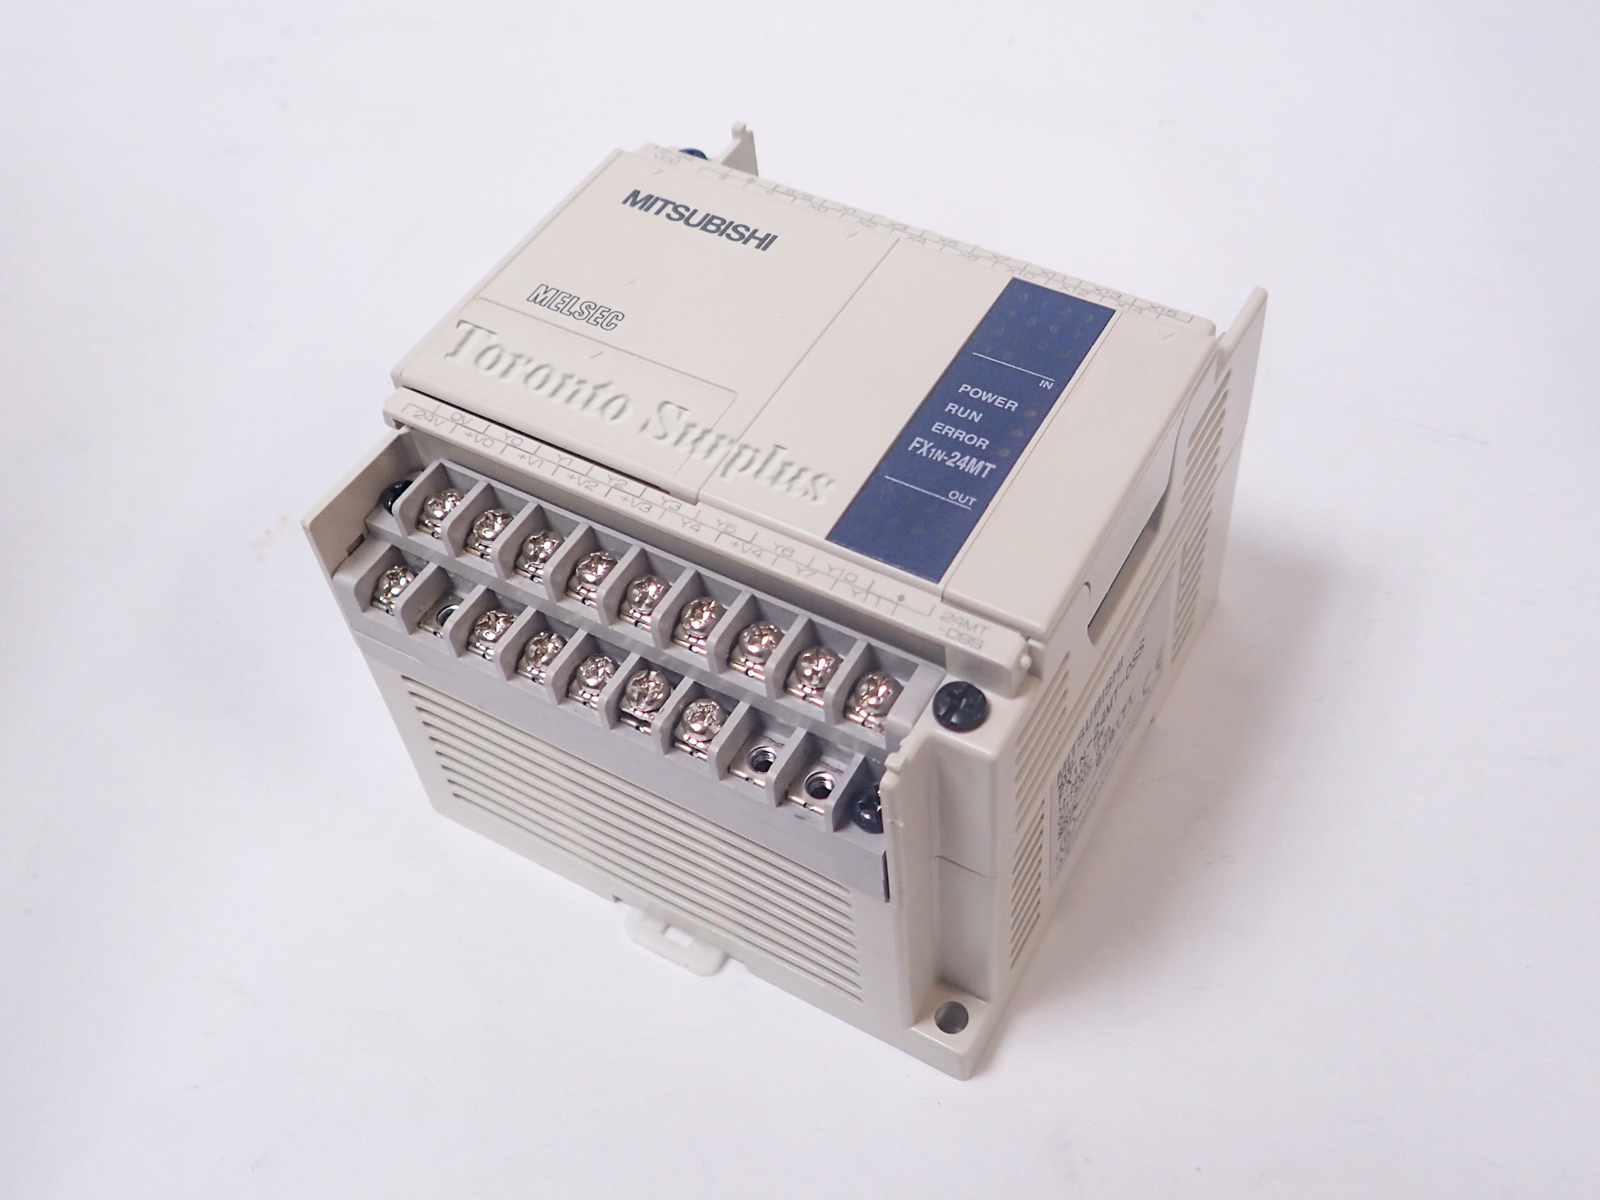 Mitsubishi FX1N-24MT-DSS Programable Controller